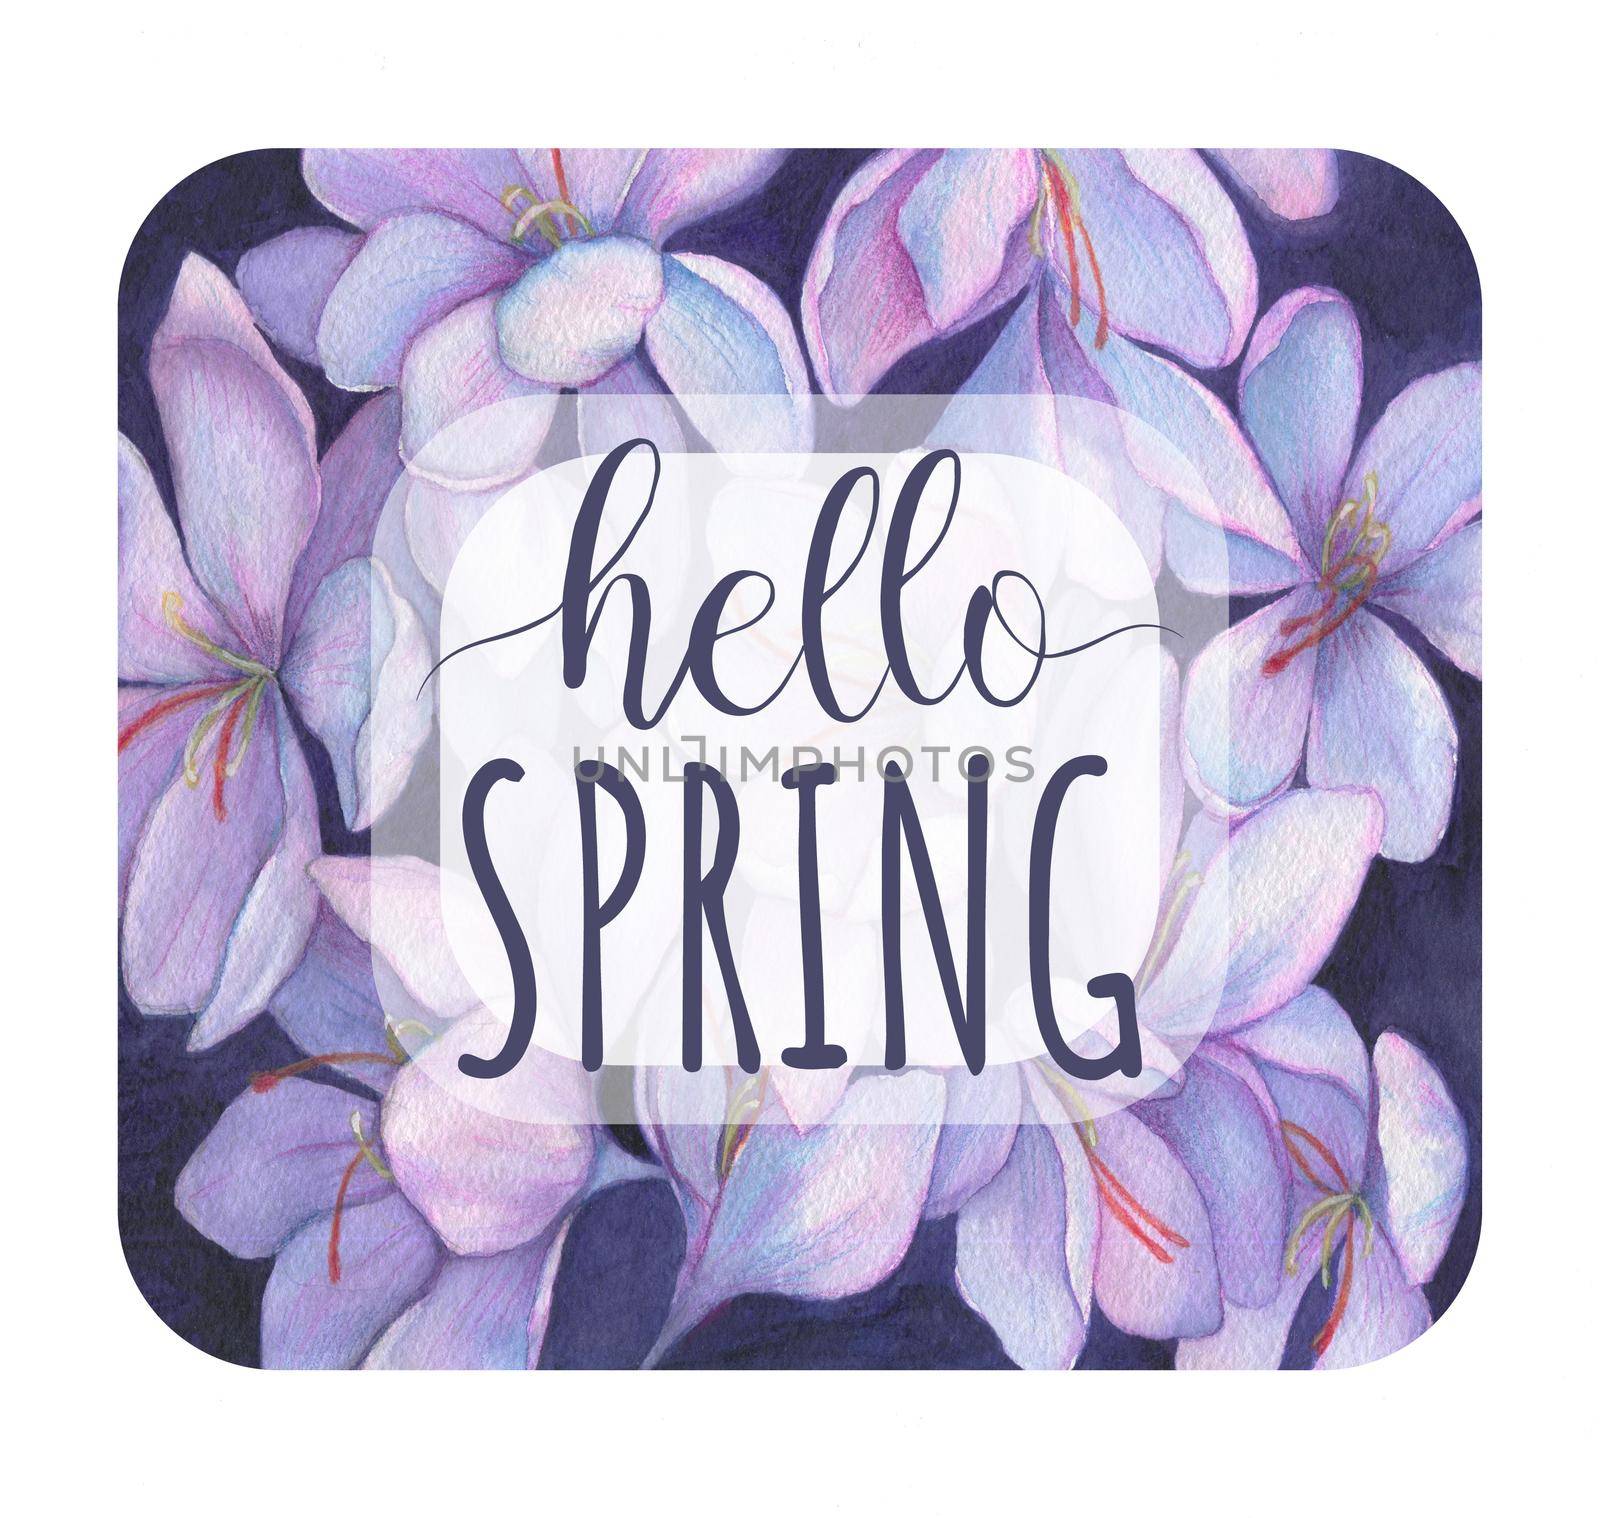 Hello Spring. Spring flowers snowdrops. Purple crocuses watercolor hand drawing. Hello spring greeting card